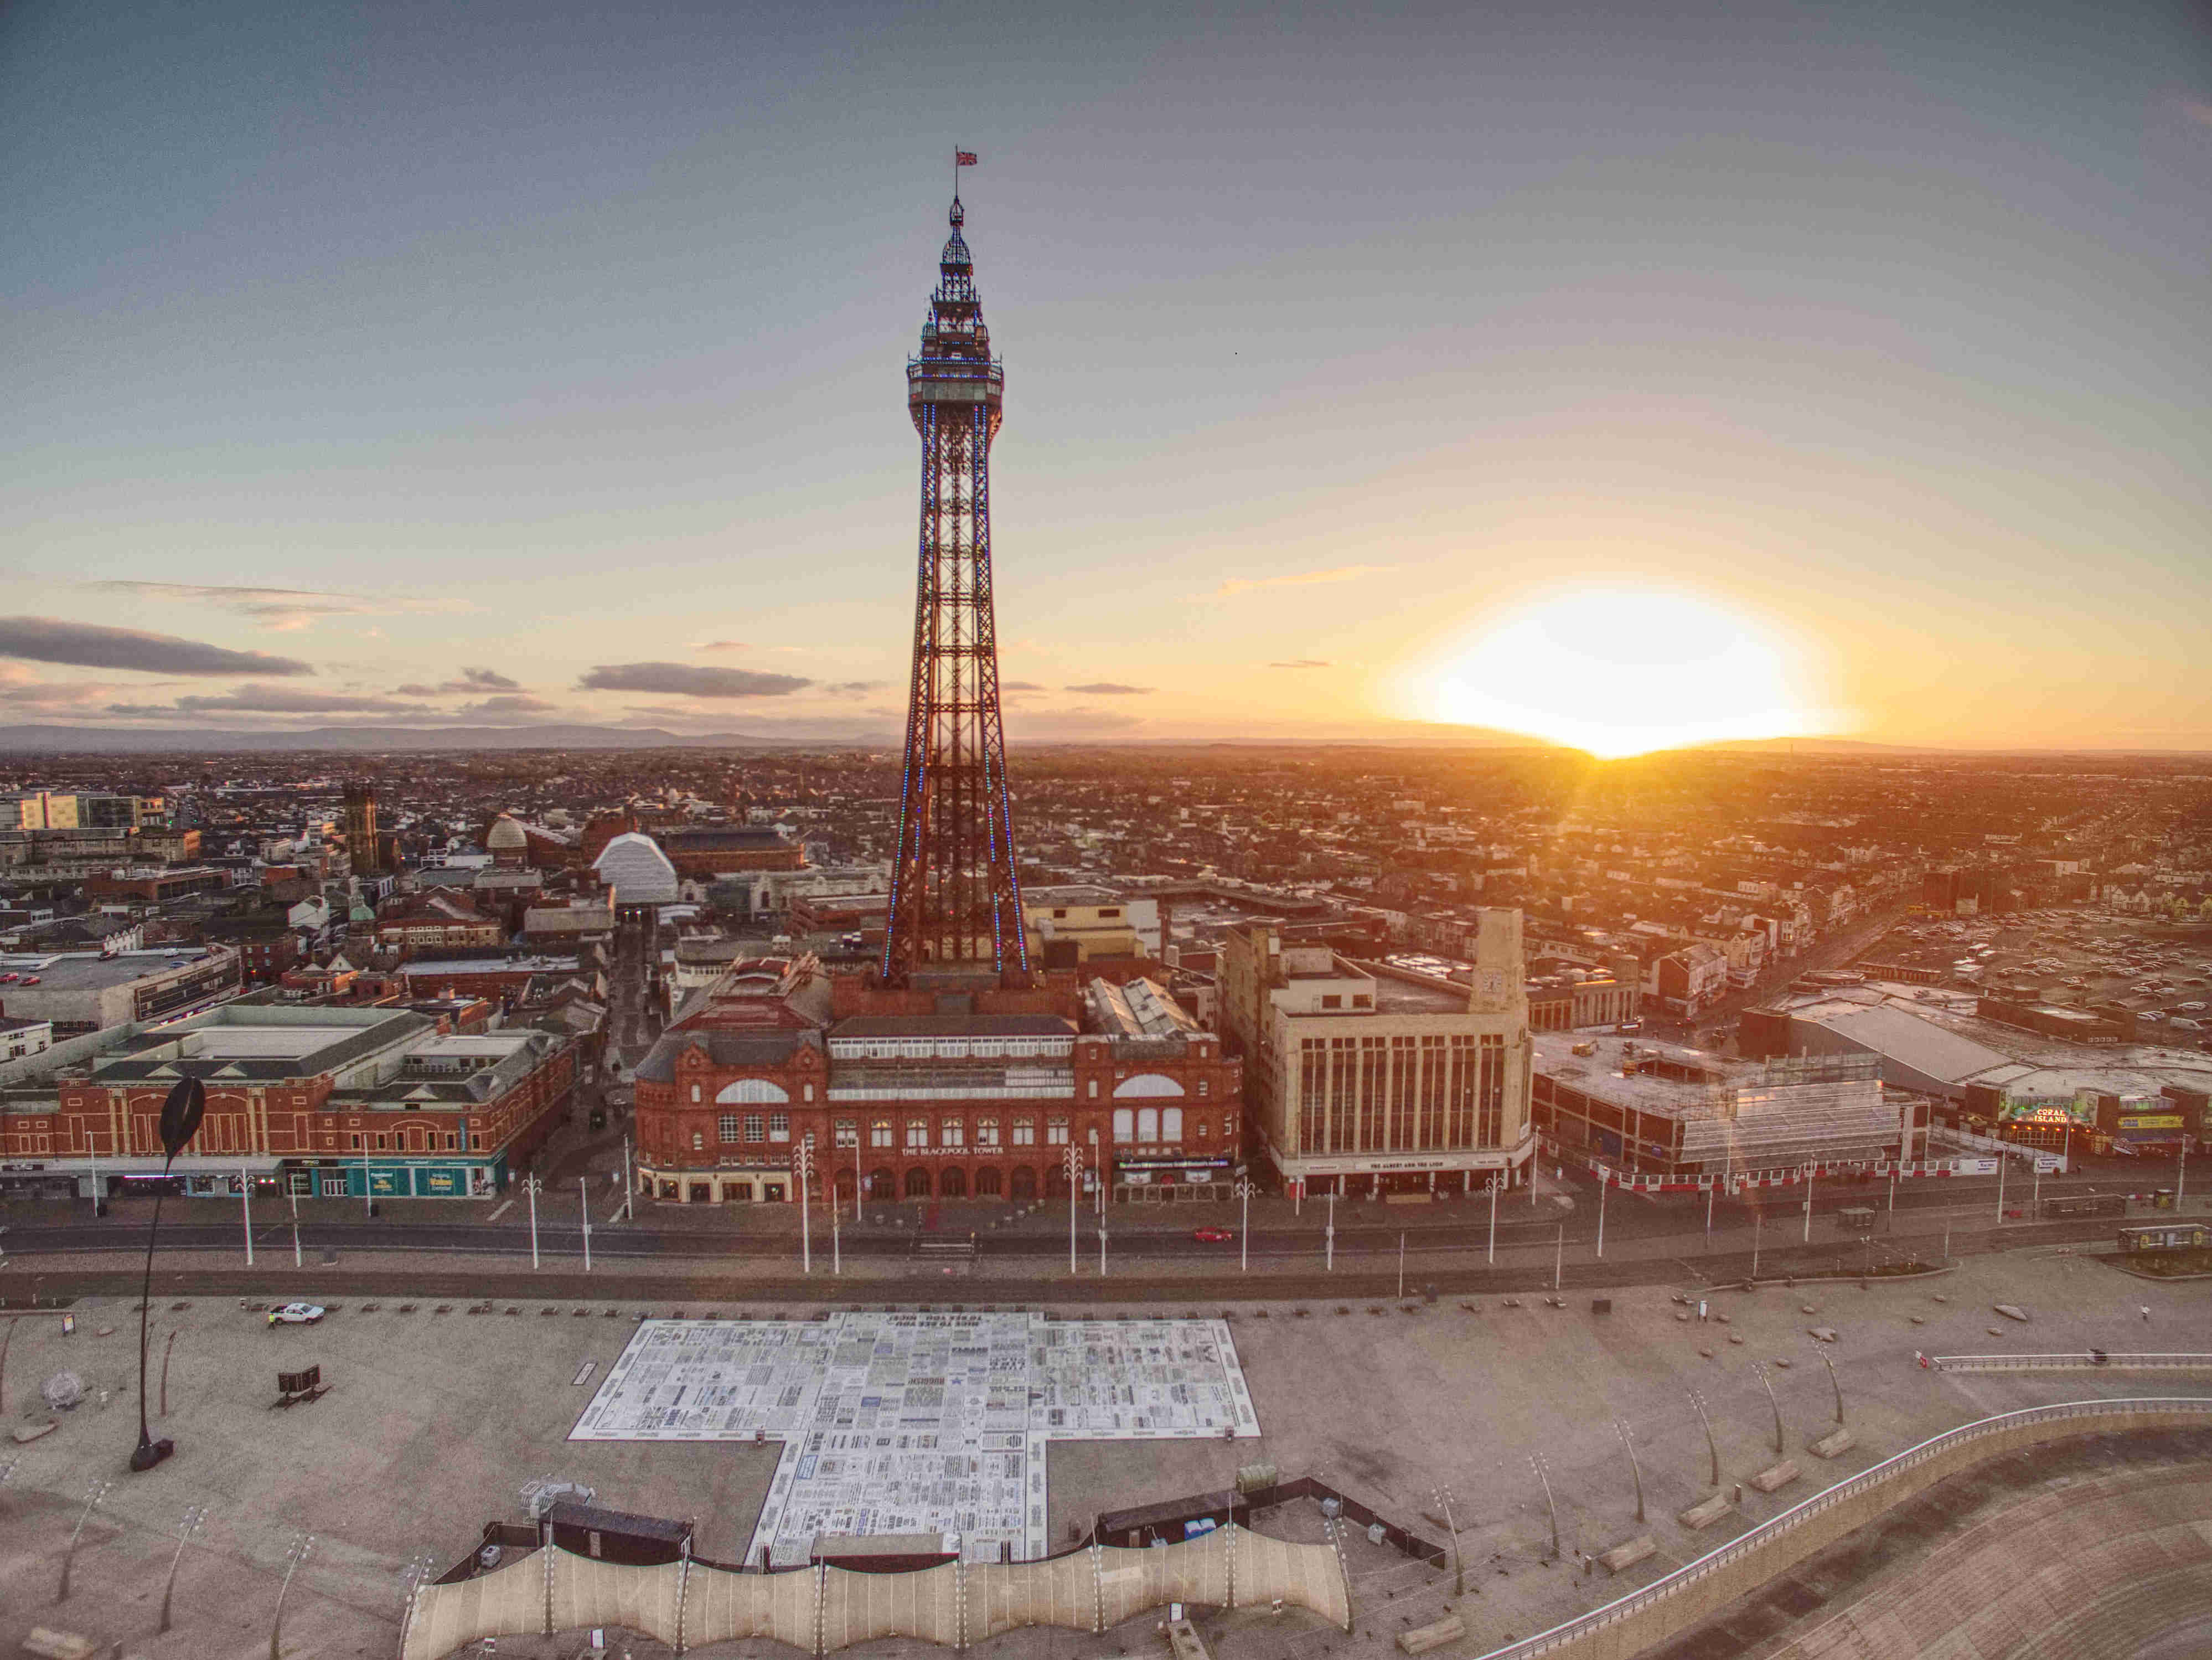 Blackpool tower by drone